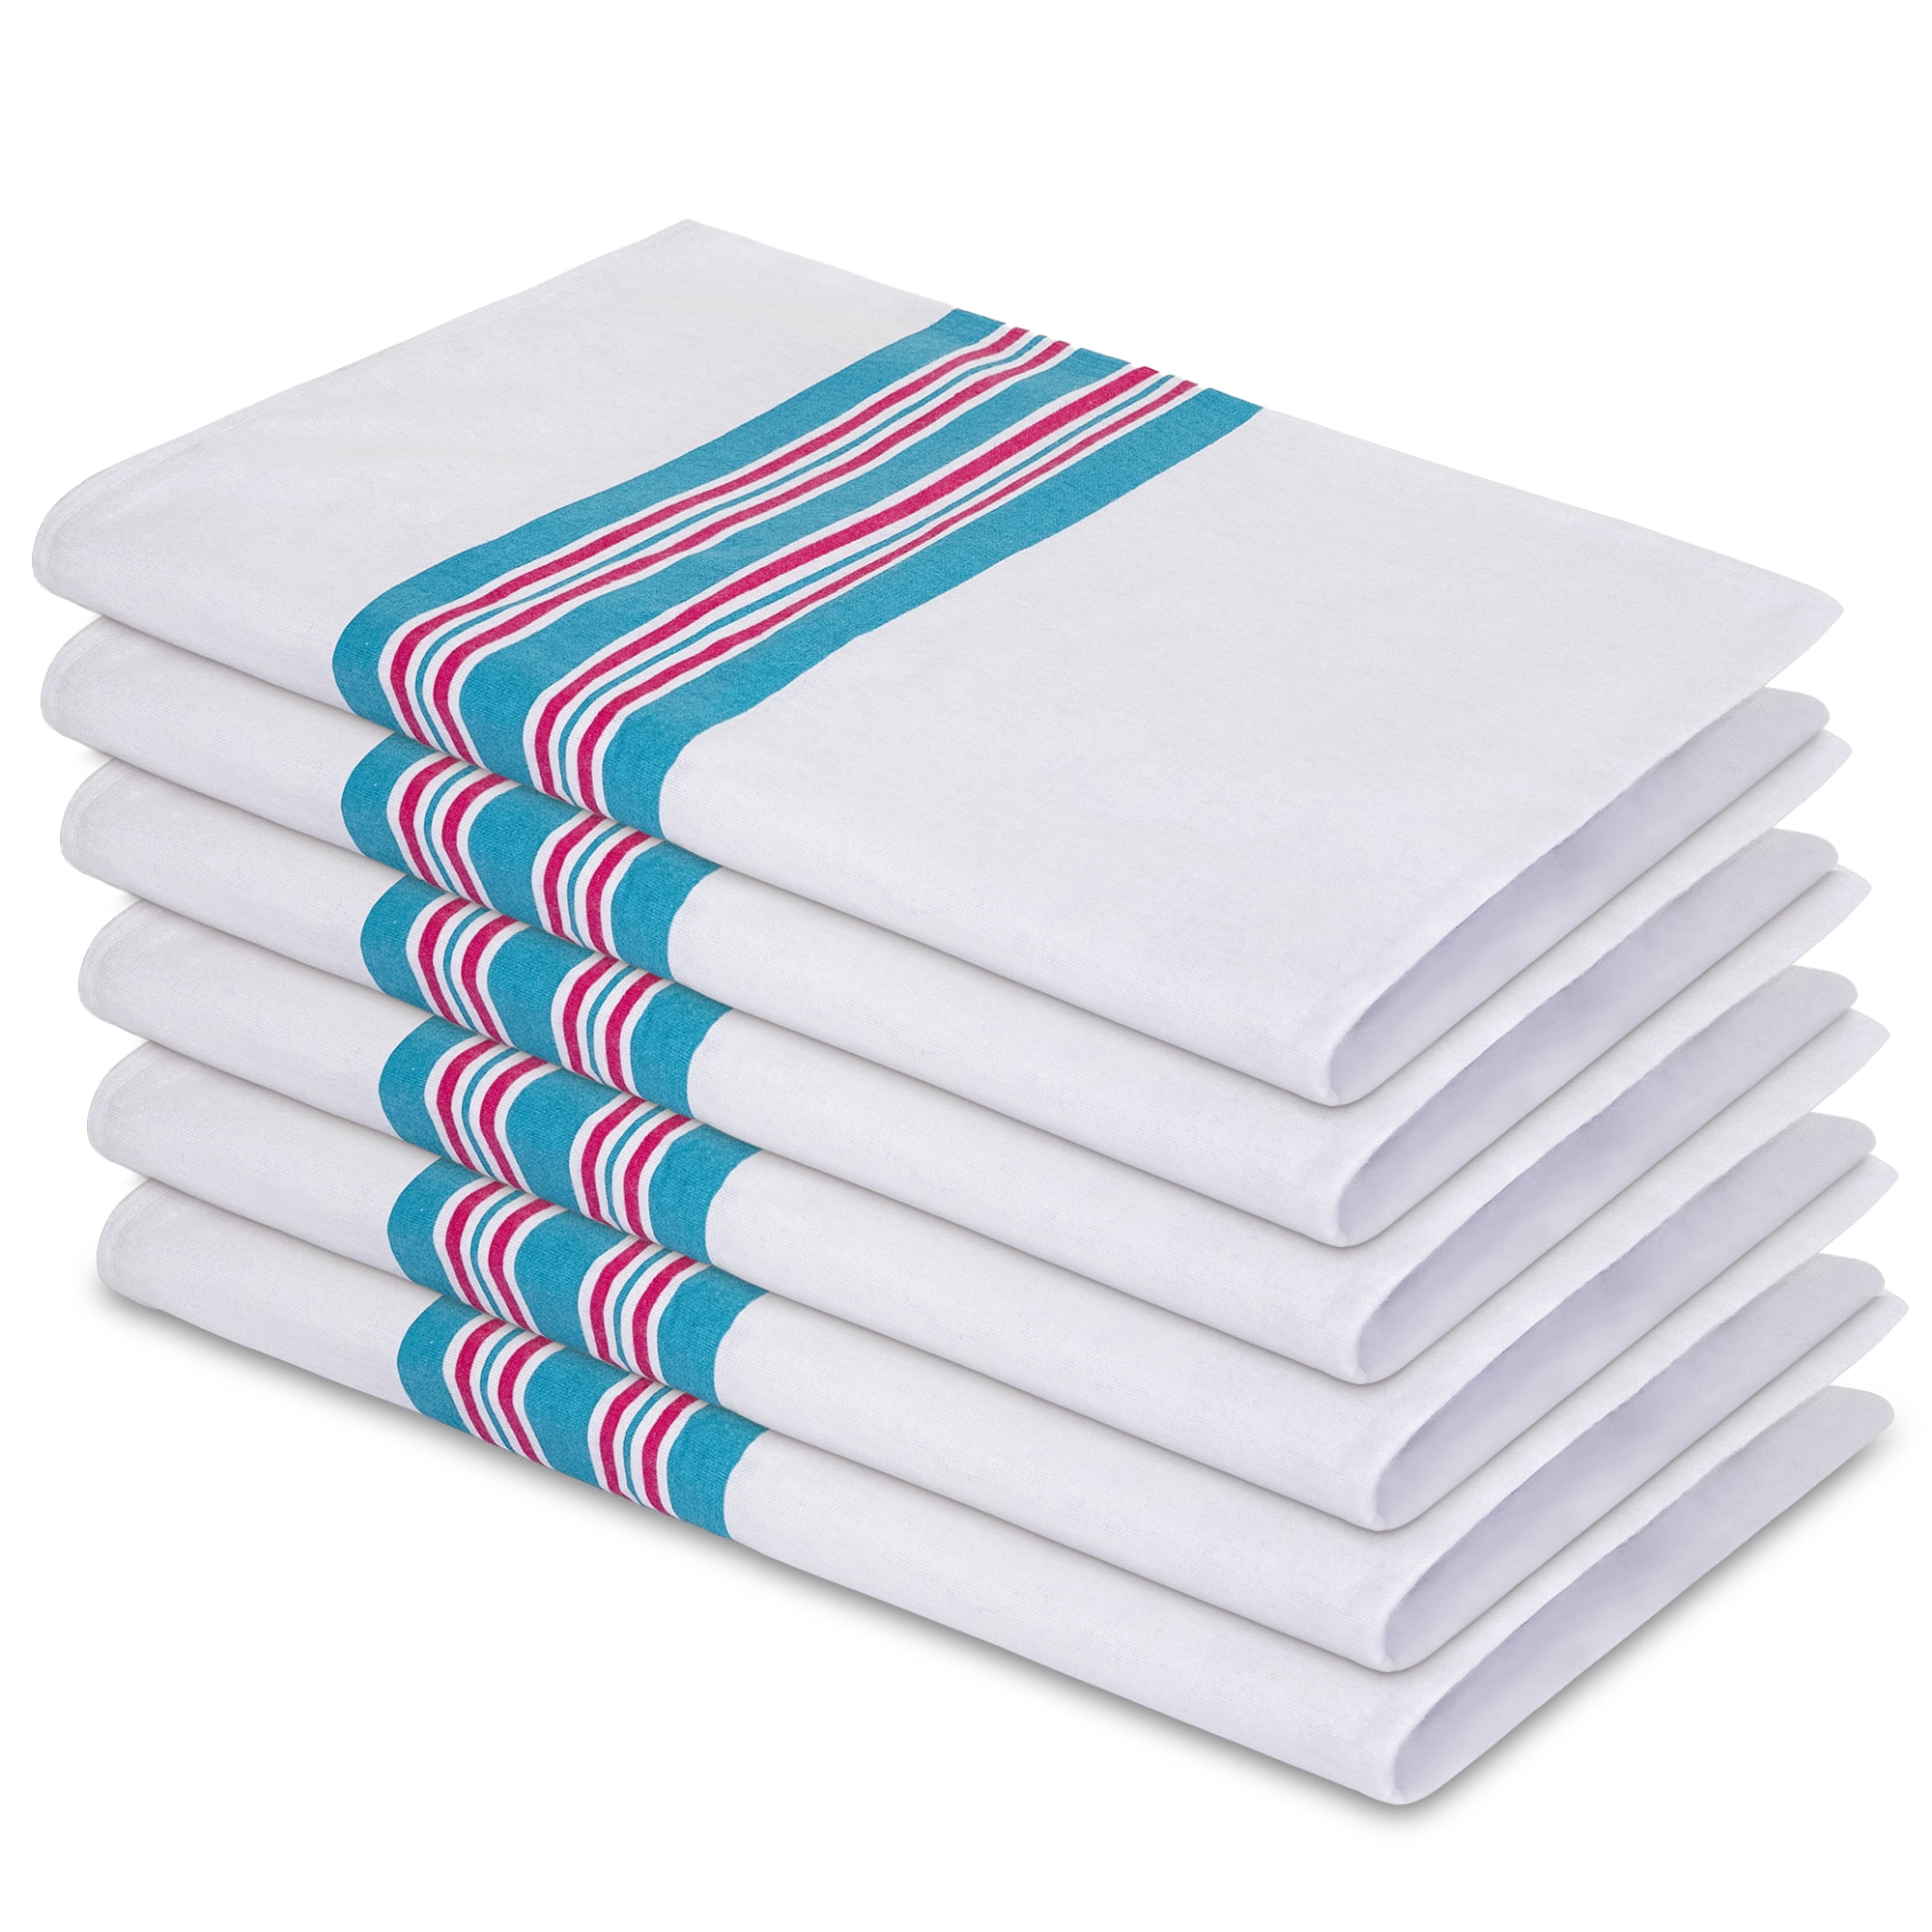 24 PK BABY INFANT HOSPITAL RECEIVING BLANKETS 100% COTTON WARM BLANKETS 30x40 